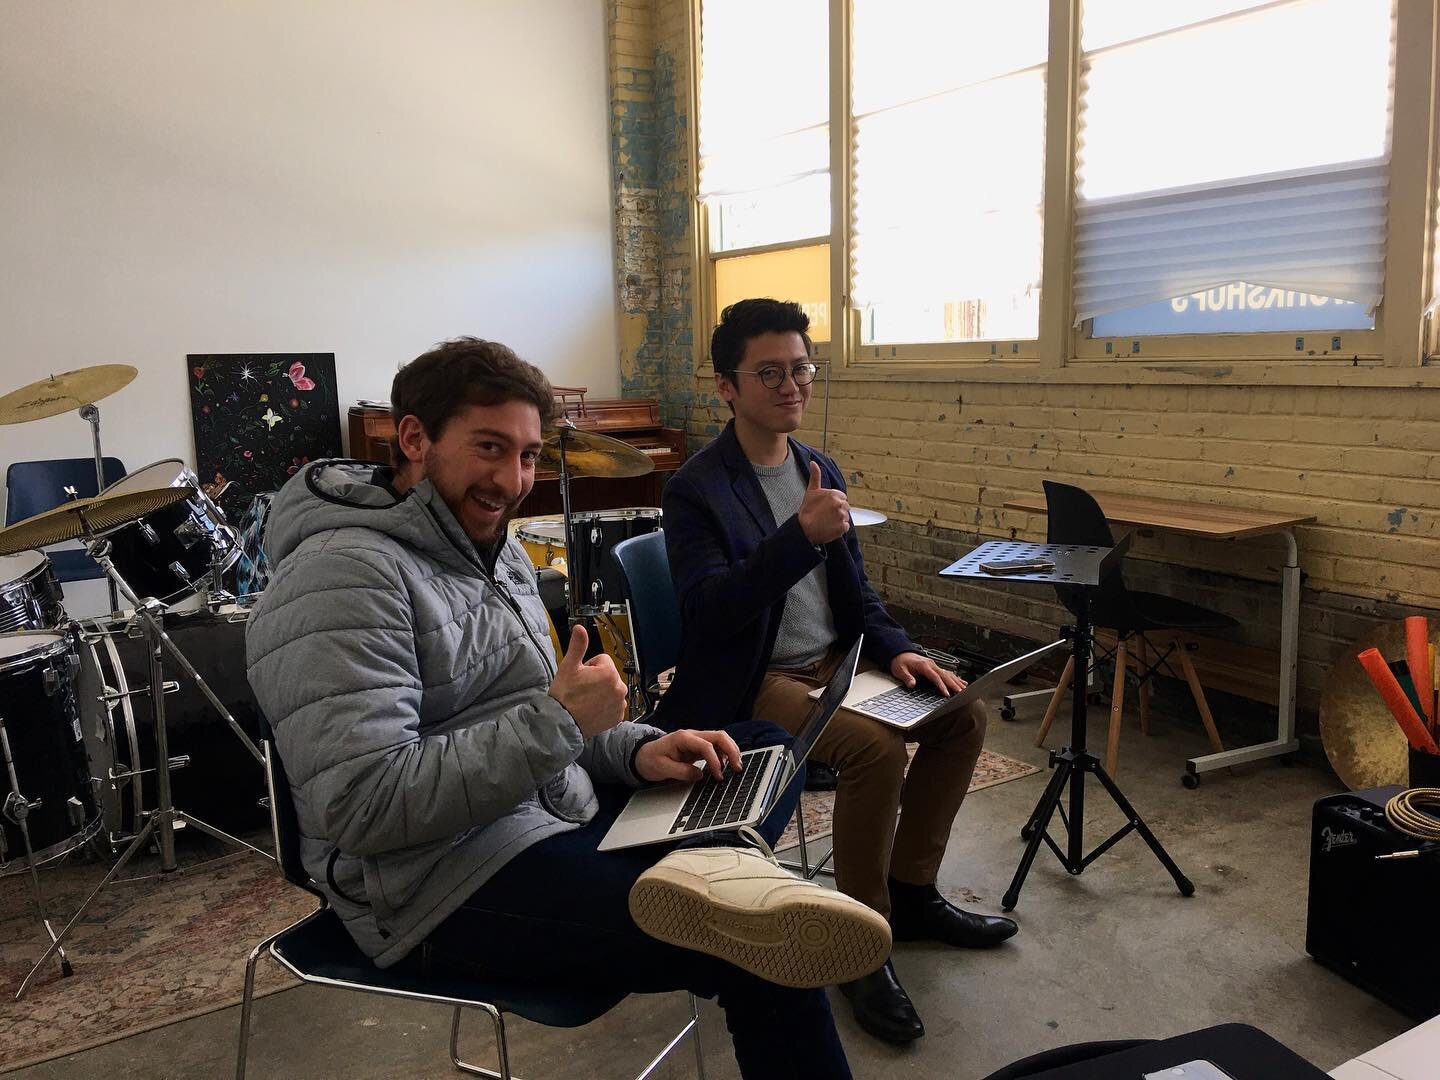 Caught them in action! 😁  Victor and Adam are currently working hard on our upcoming 2023 New Cottage's Summer Camp! 🎸 🎨  Contact us for more info on this upcoming event. You don't wanna miss it! 😎